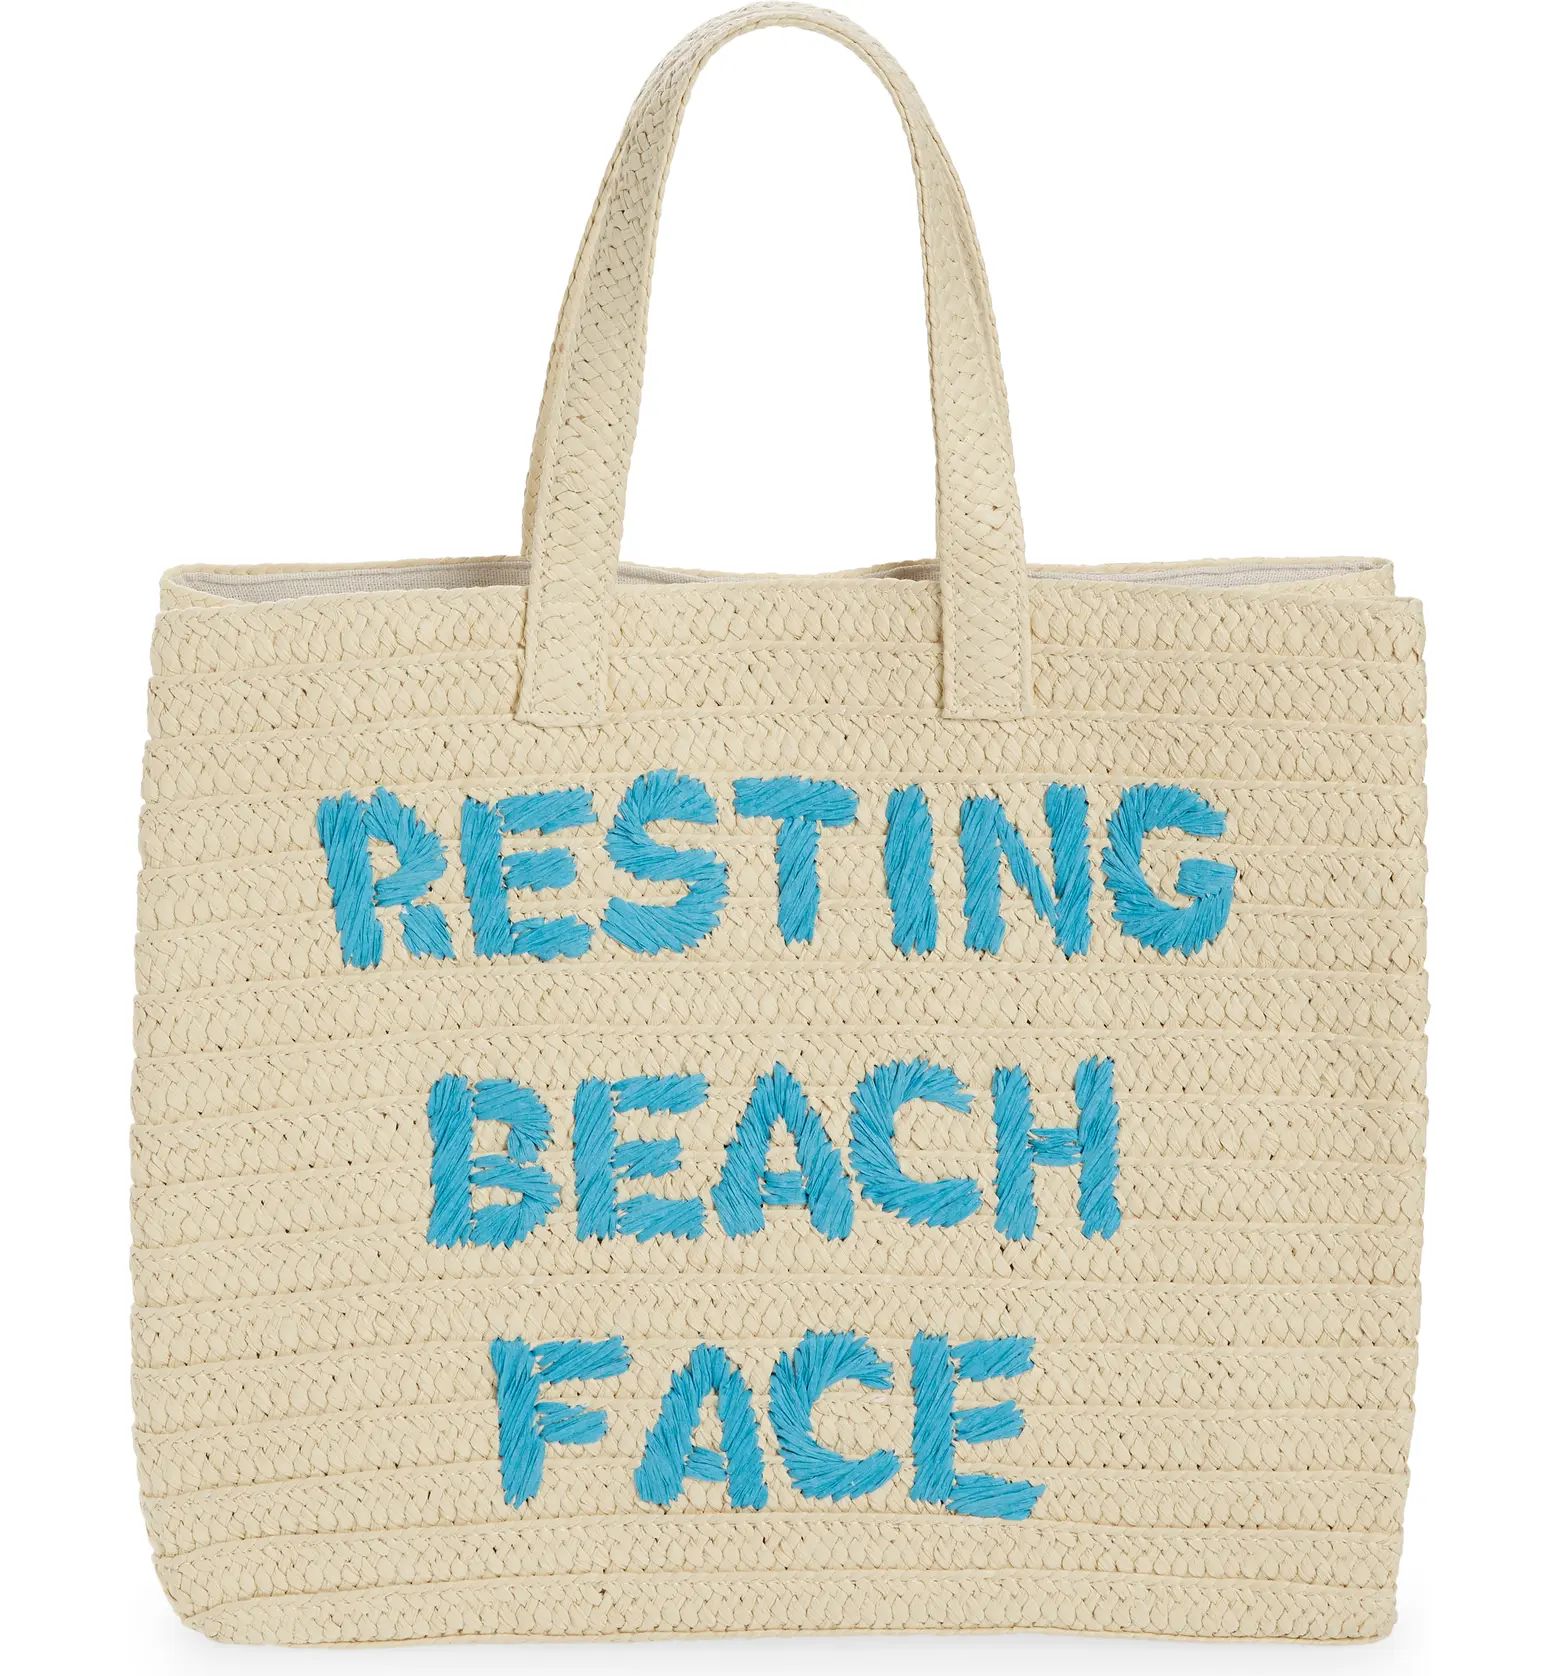 btb Los Angeles Resting Beach Face Straw Tote | Nordstrom | Nordstrom